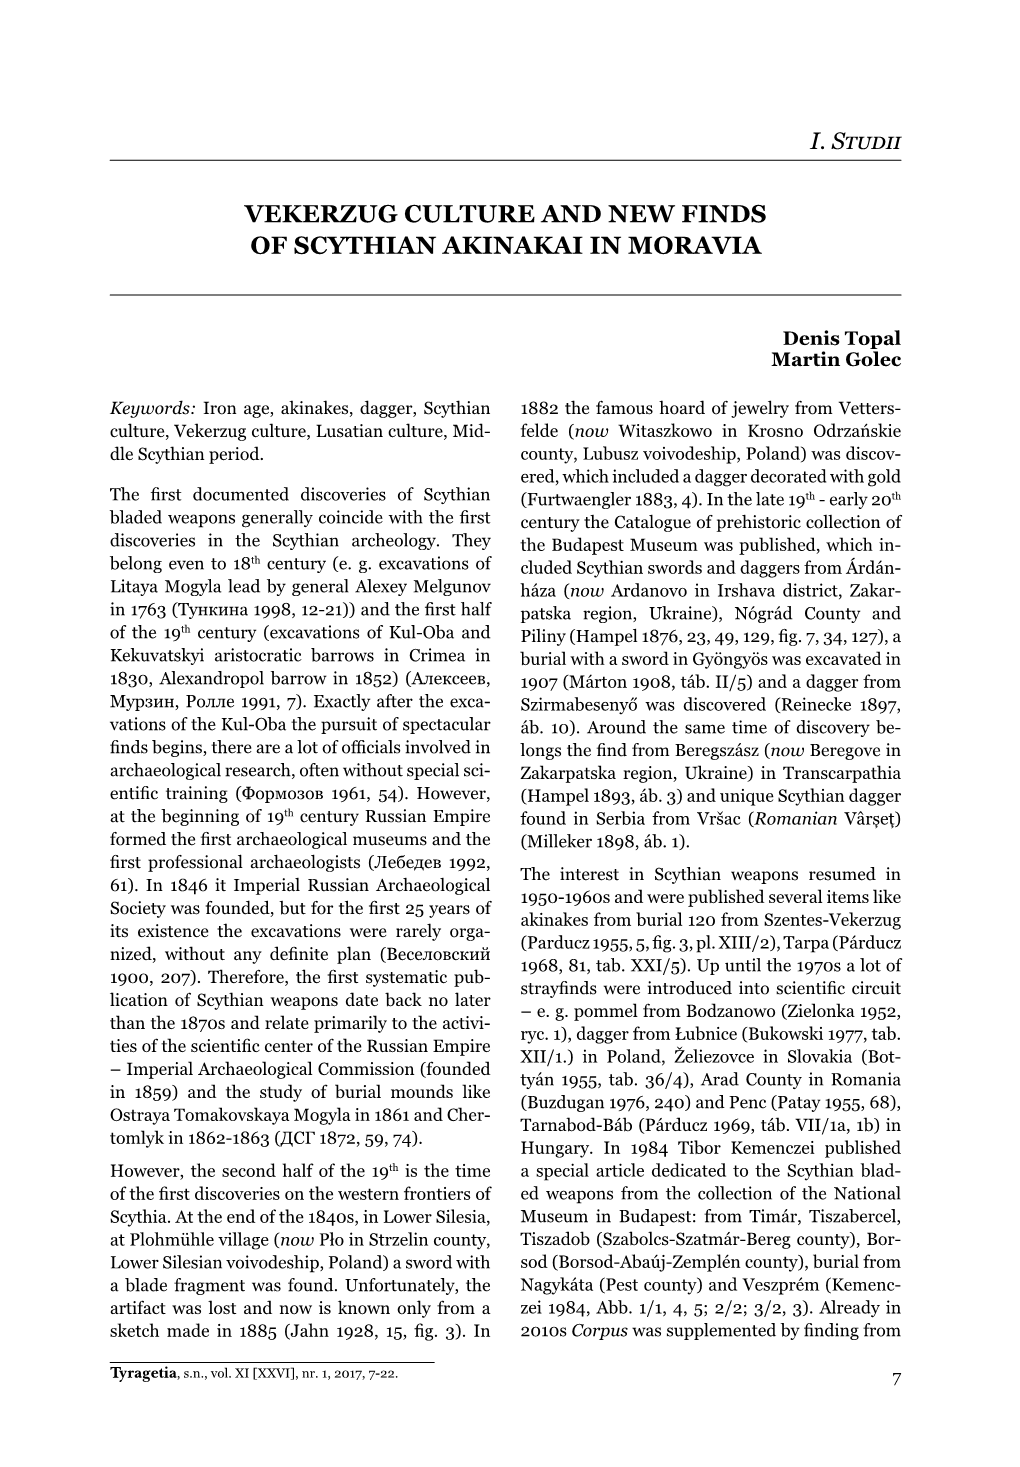 Vekerzug Culture and New Finds of Scythian Akinakai in Moravia